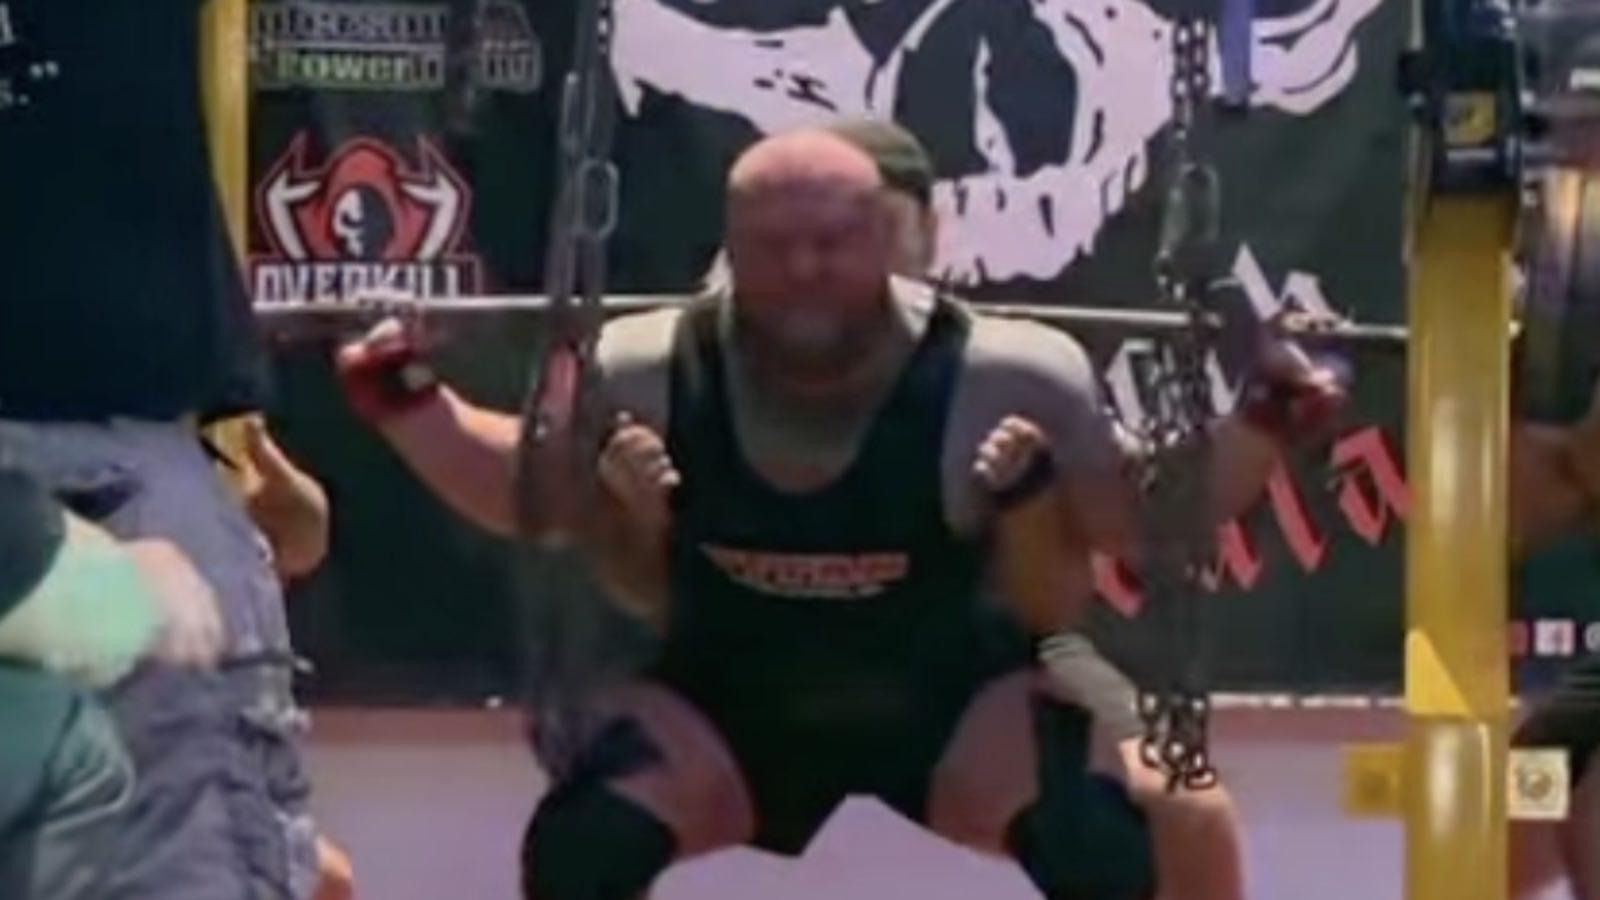 phillip-herndon-becomes-lightest-person-to-squat-453.9-kilograms-(1,000-pounds)-raw-with-wraps-–-breaking-muscle